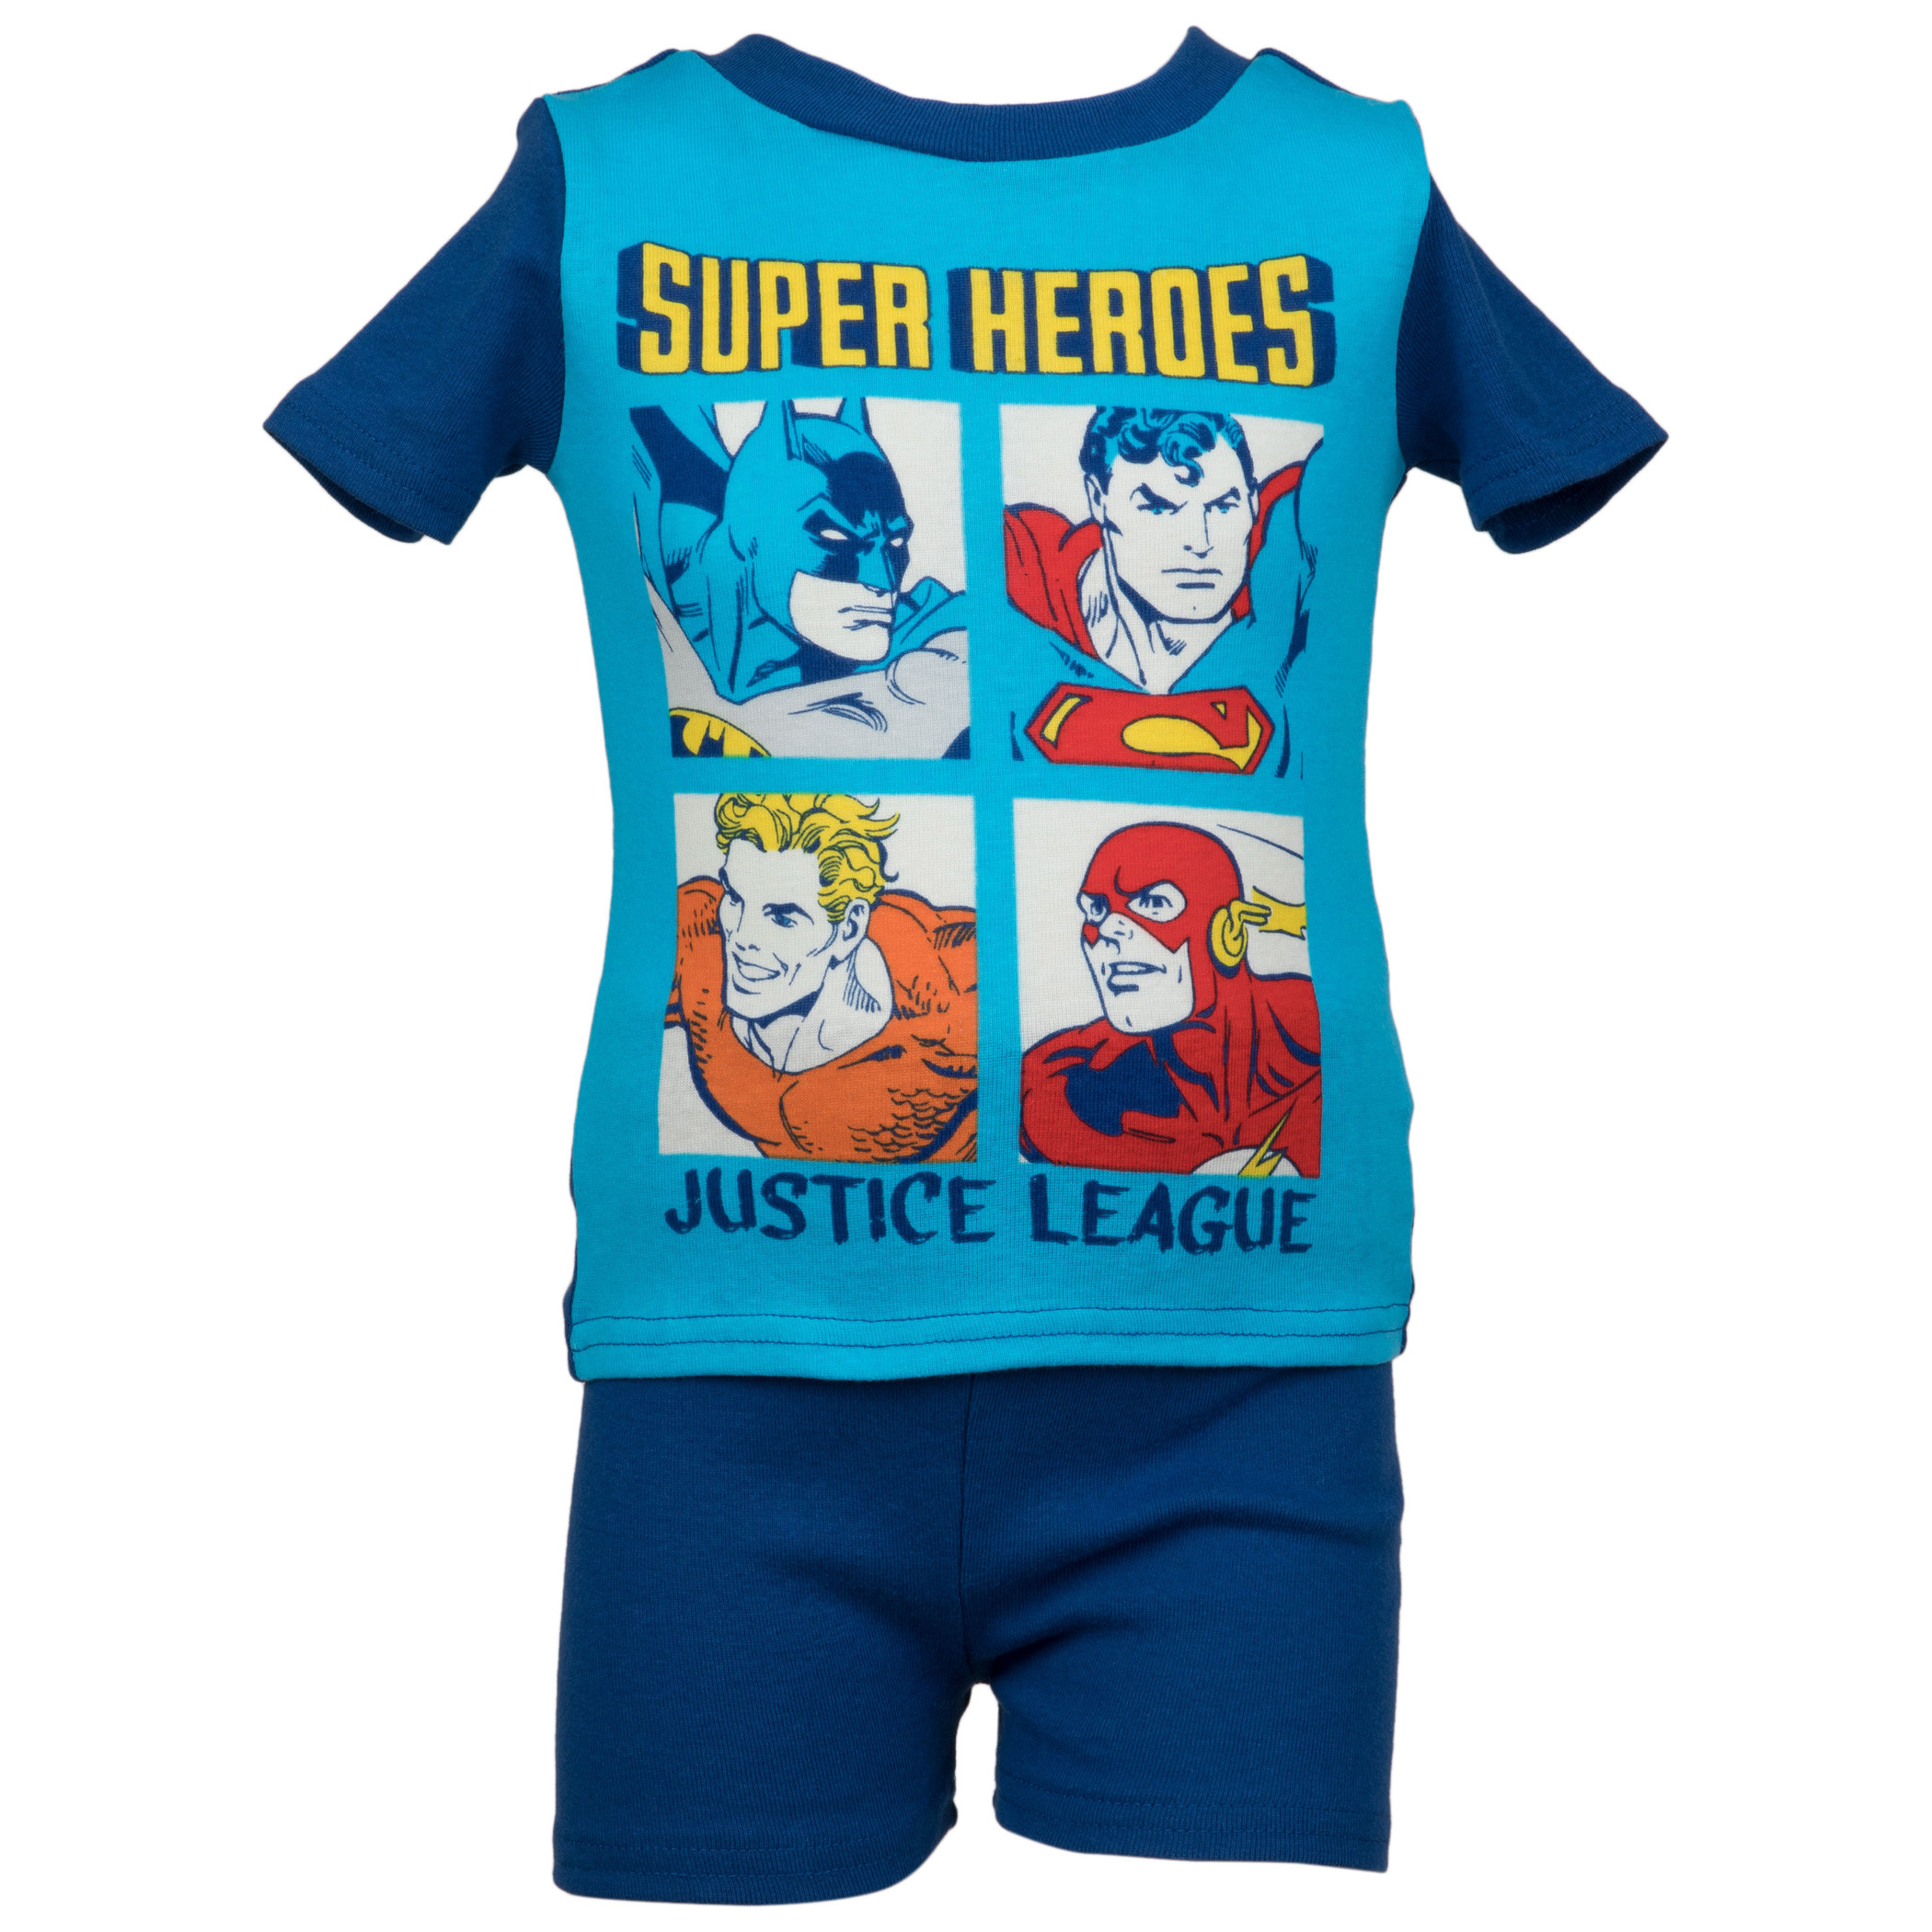 Justice League 2-piece Toddler Boy/Girl Super Heroes Top and Pants Set